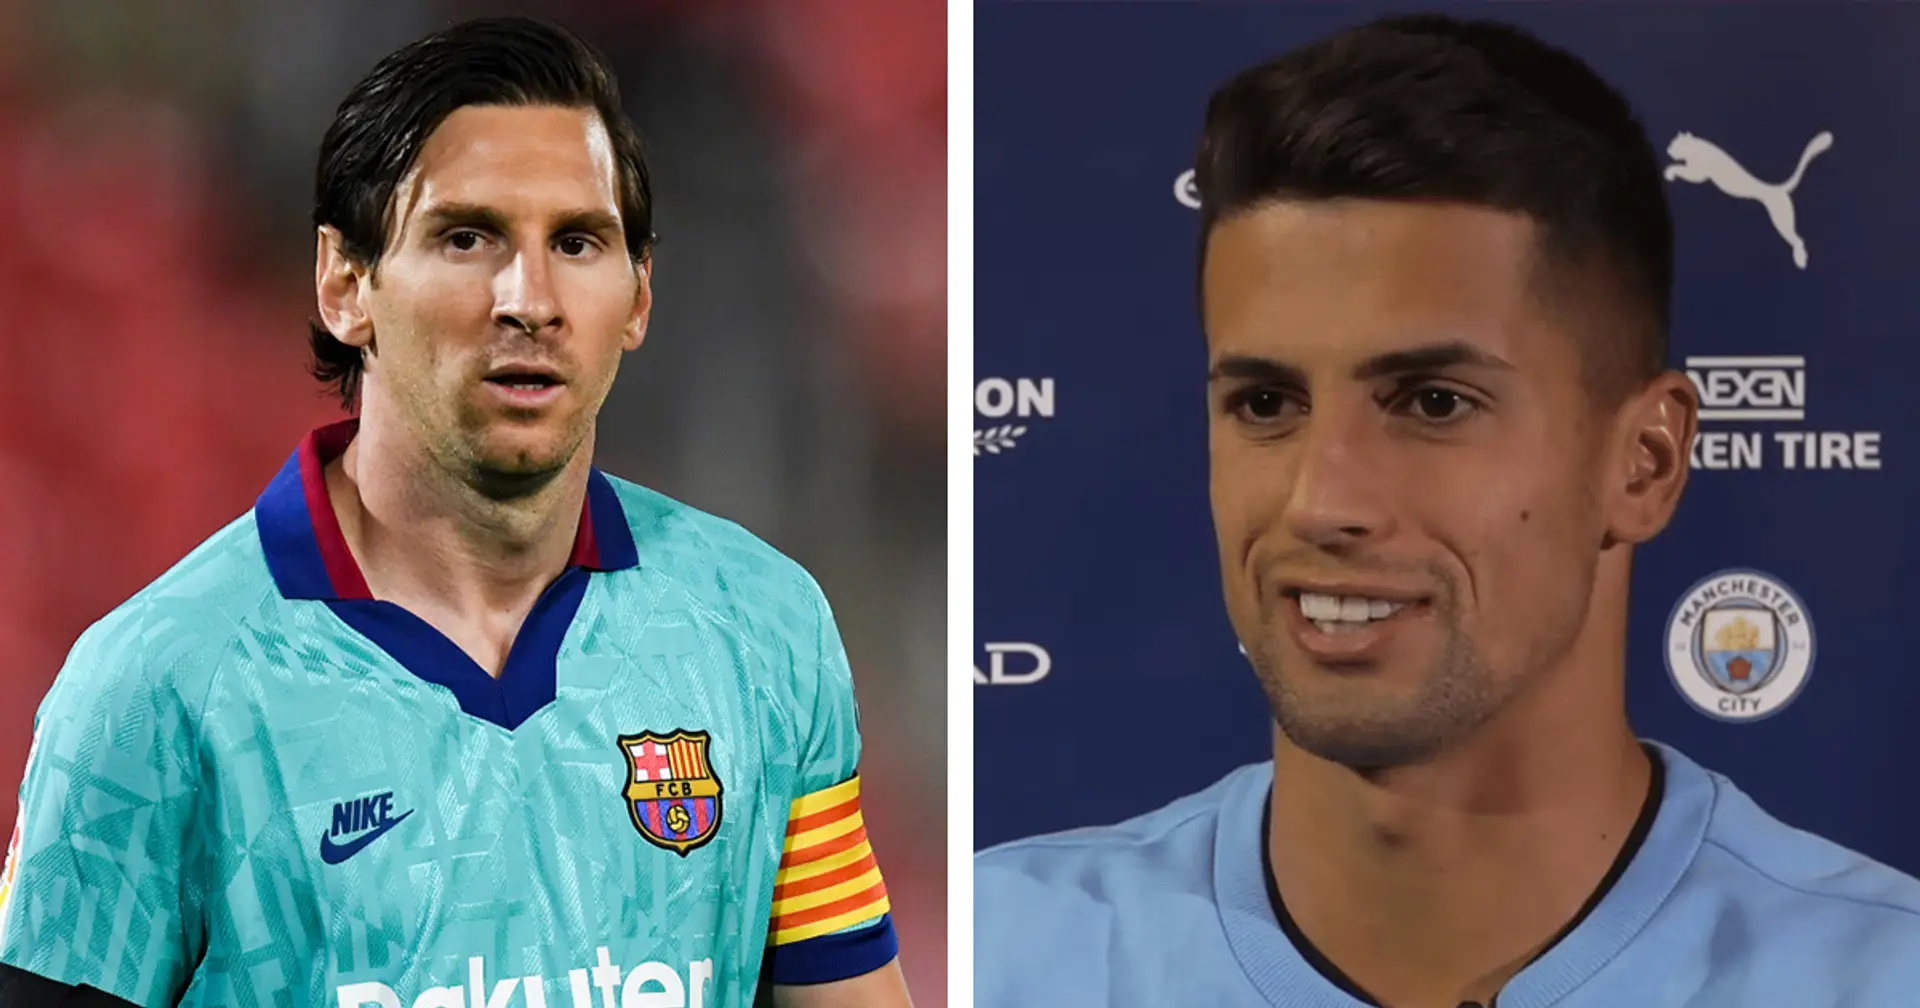 'Messi would have a great season at Man City': Does Joao Cancelo know something we don't?